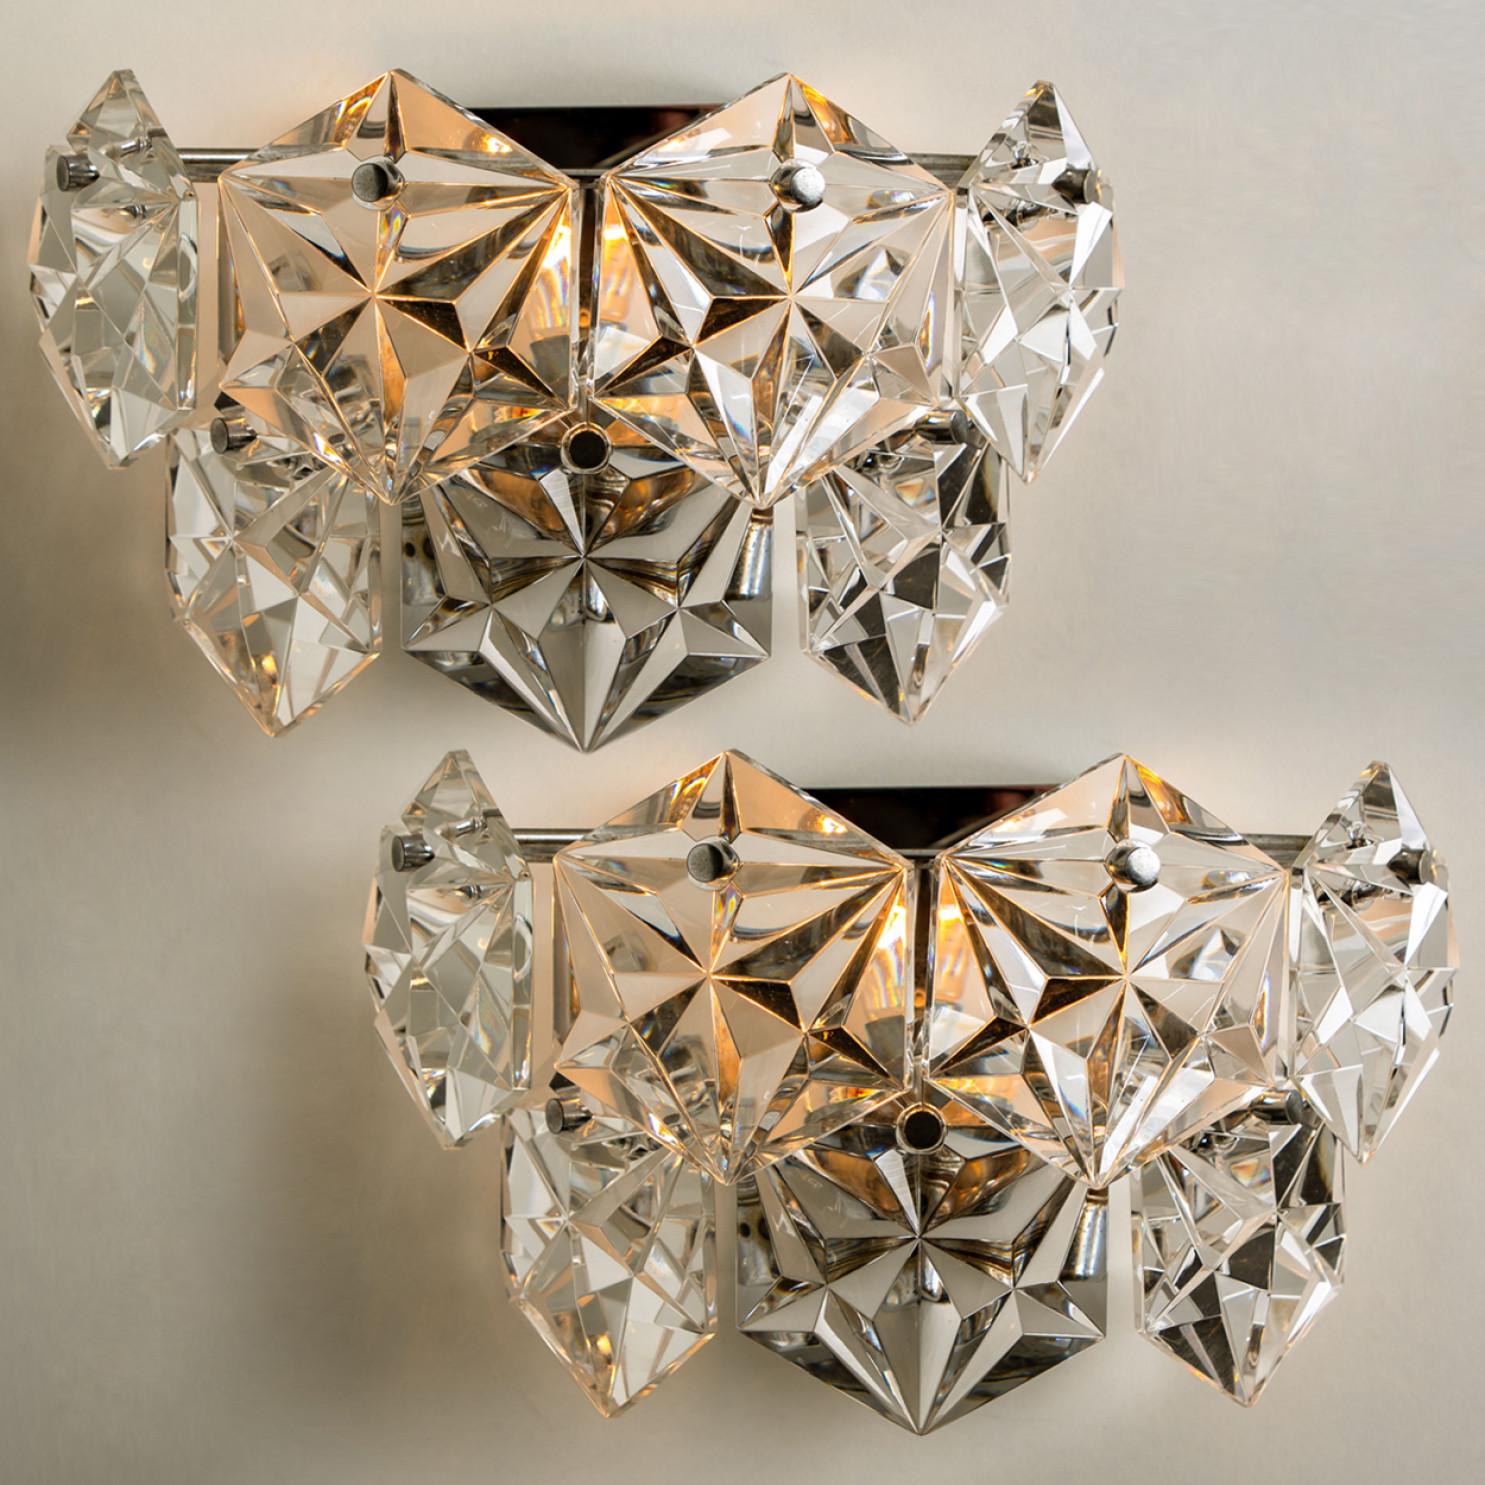 1 of the 4 luxurious of chrome frames and thick diamond crystal sconces by the famed maker, Kinkeldey. Very elegant light fixtures, comfortable with all decor periods. The crystals are meticulously cut in such a way that radiate the light of the